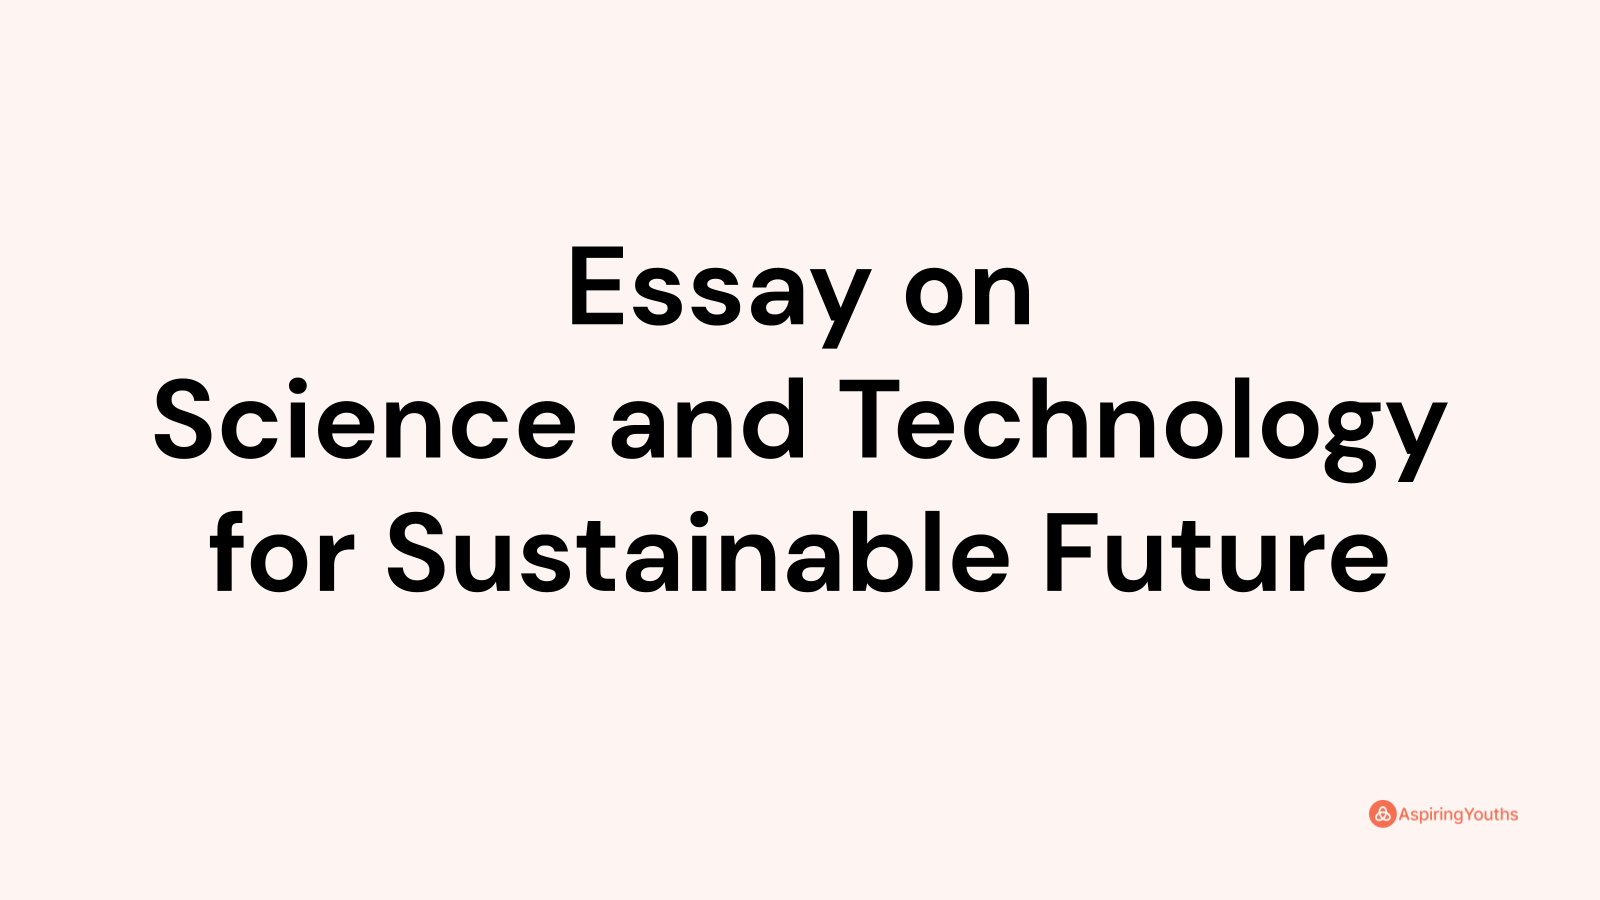 science and technology for sustainable future essay writing